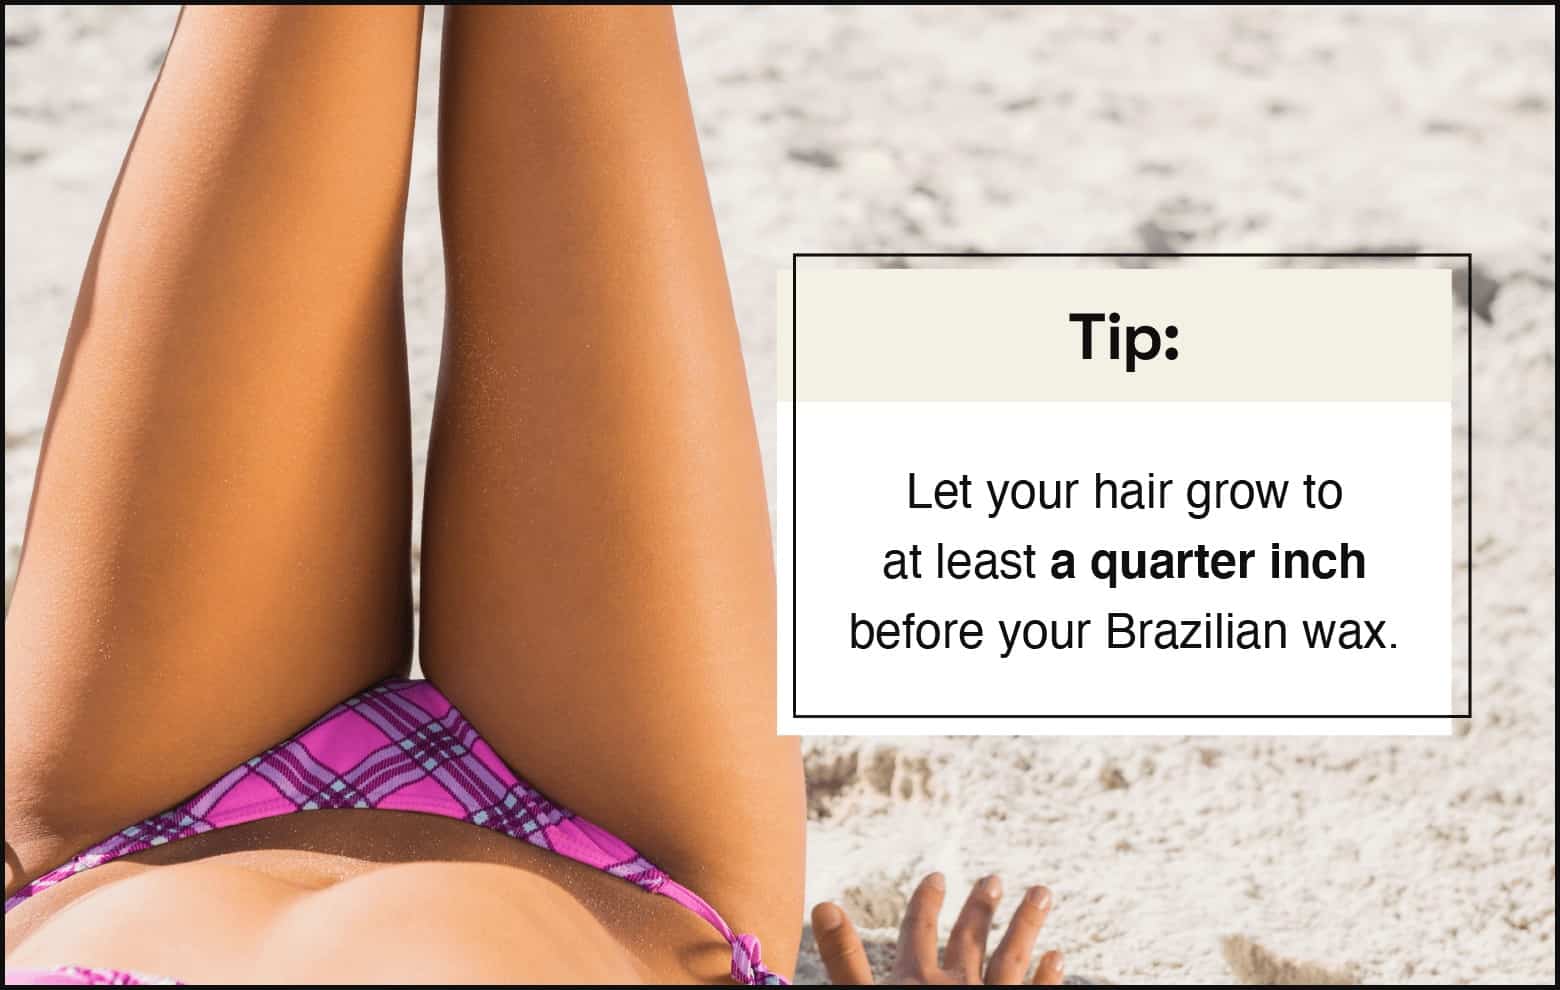 close up of person with medium skin tone wearing a pink plaid bikini bottom on the left, copy on the right: let your hair grow to at least a quarter inch before your Brazilian wax